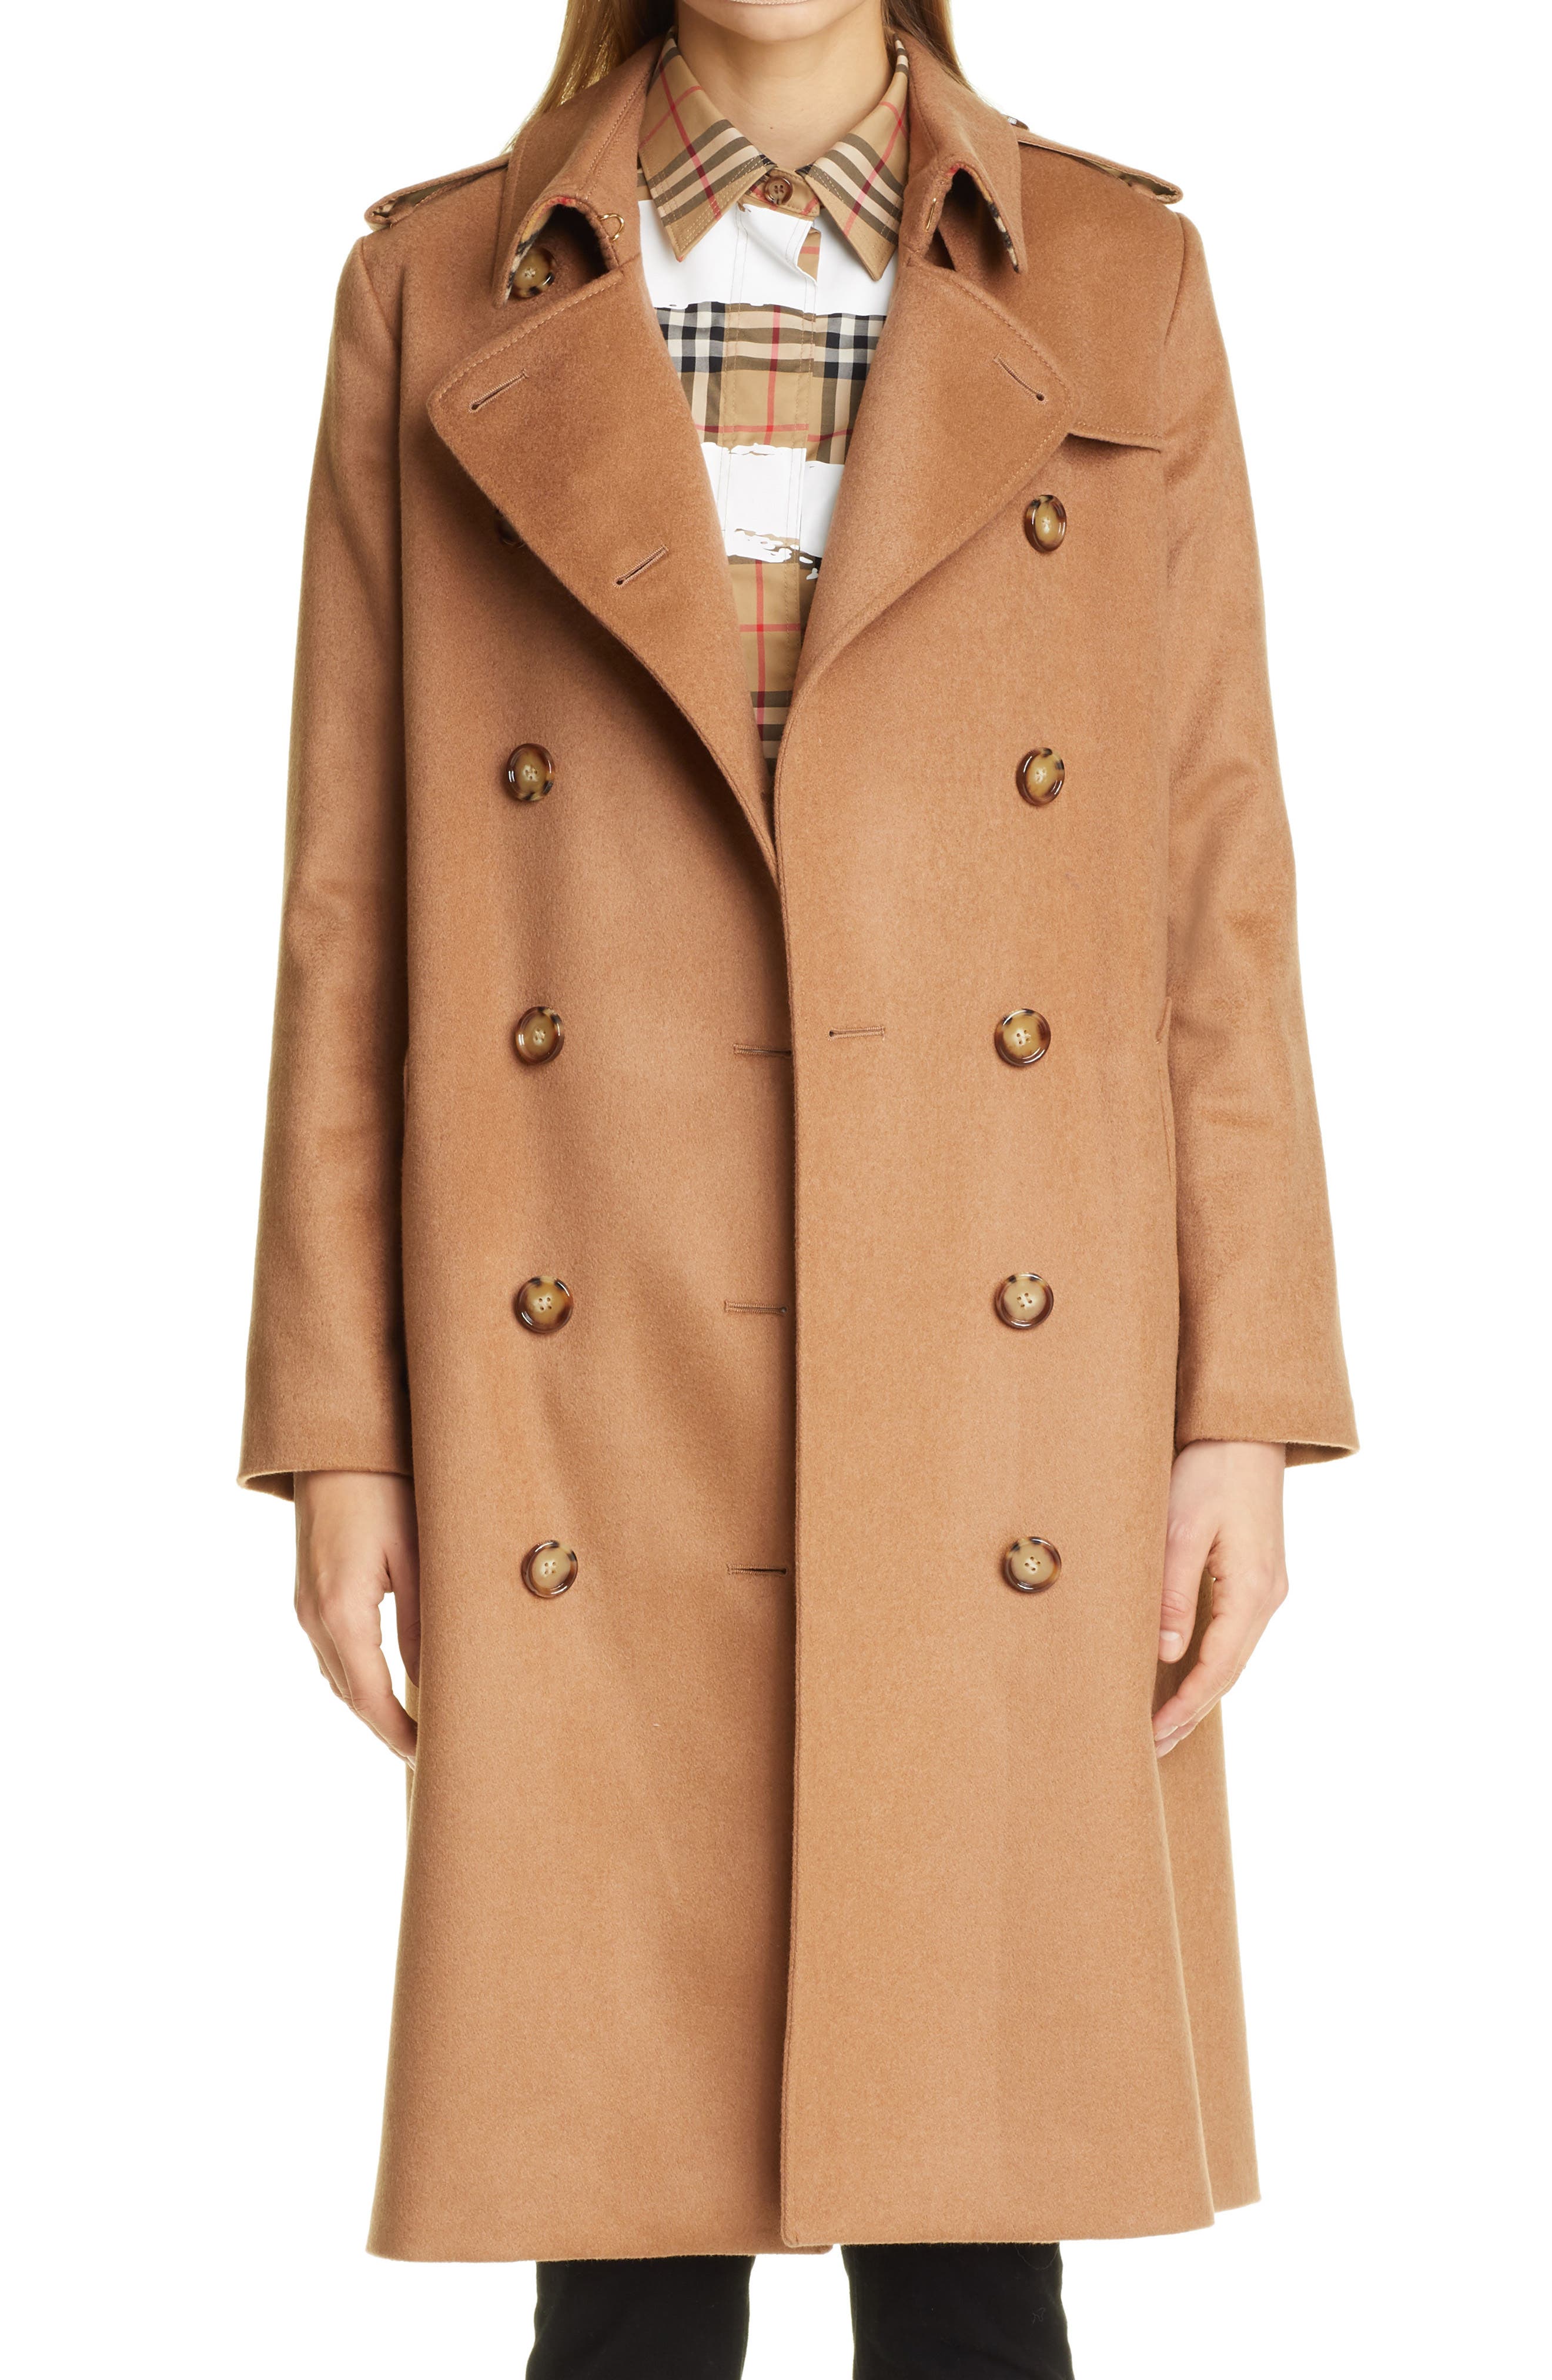 Cozy loose fitting warm cashmere woman coat